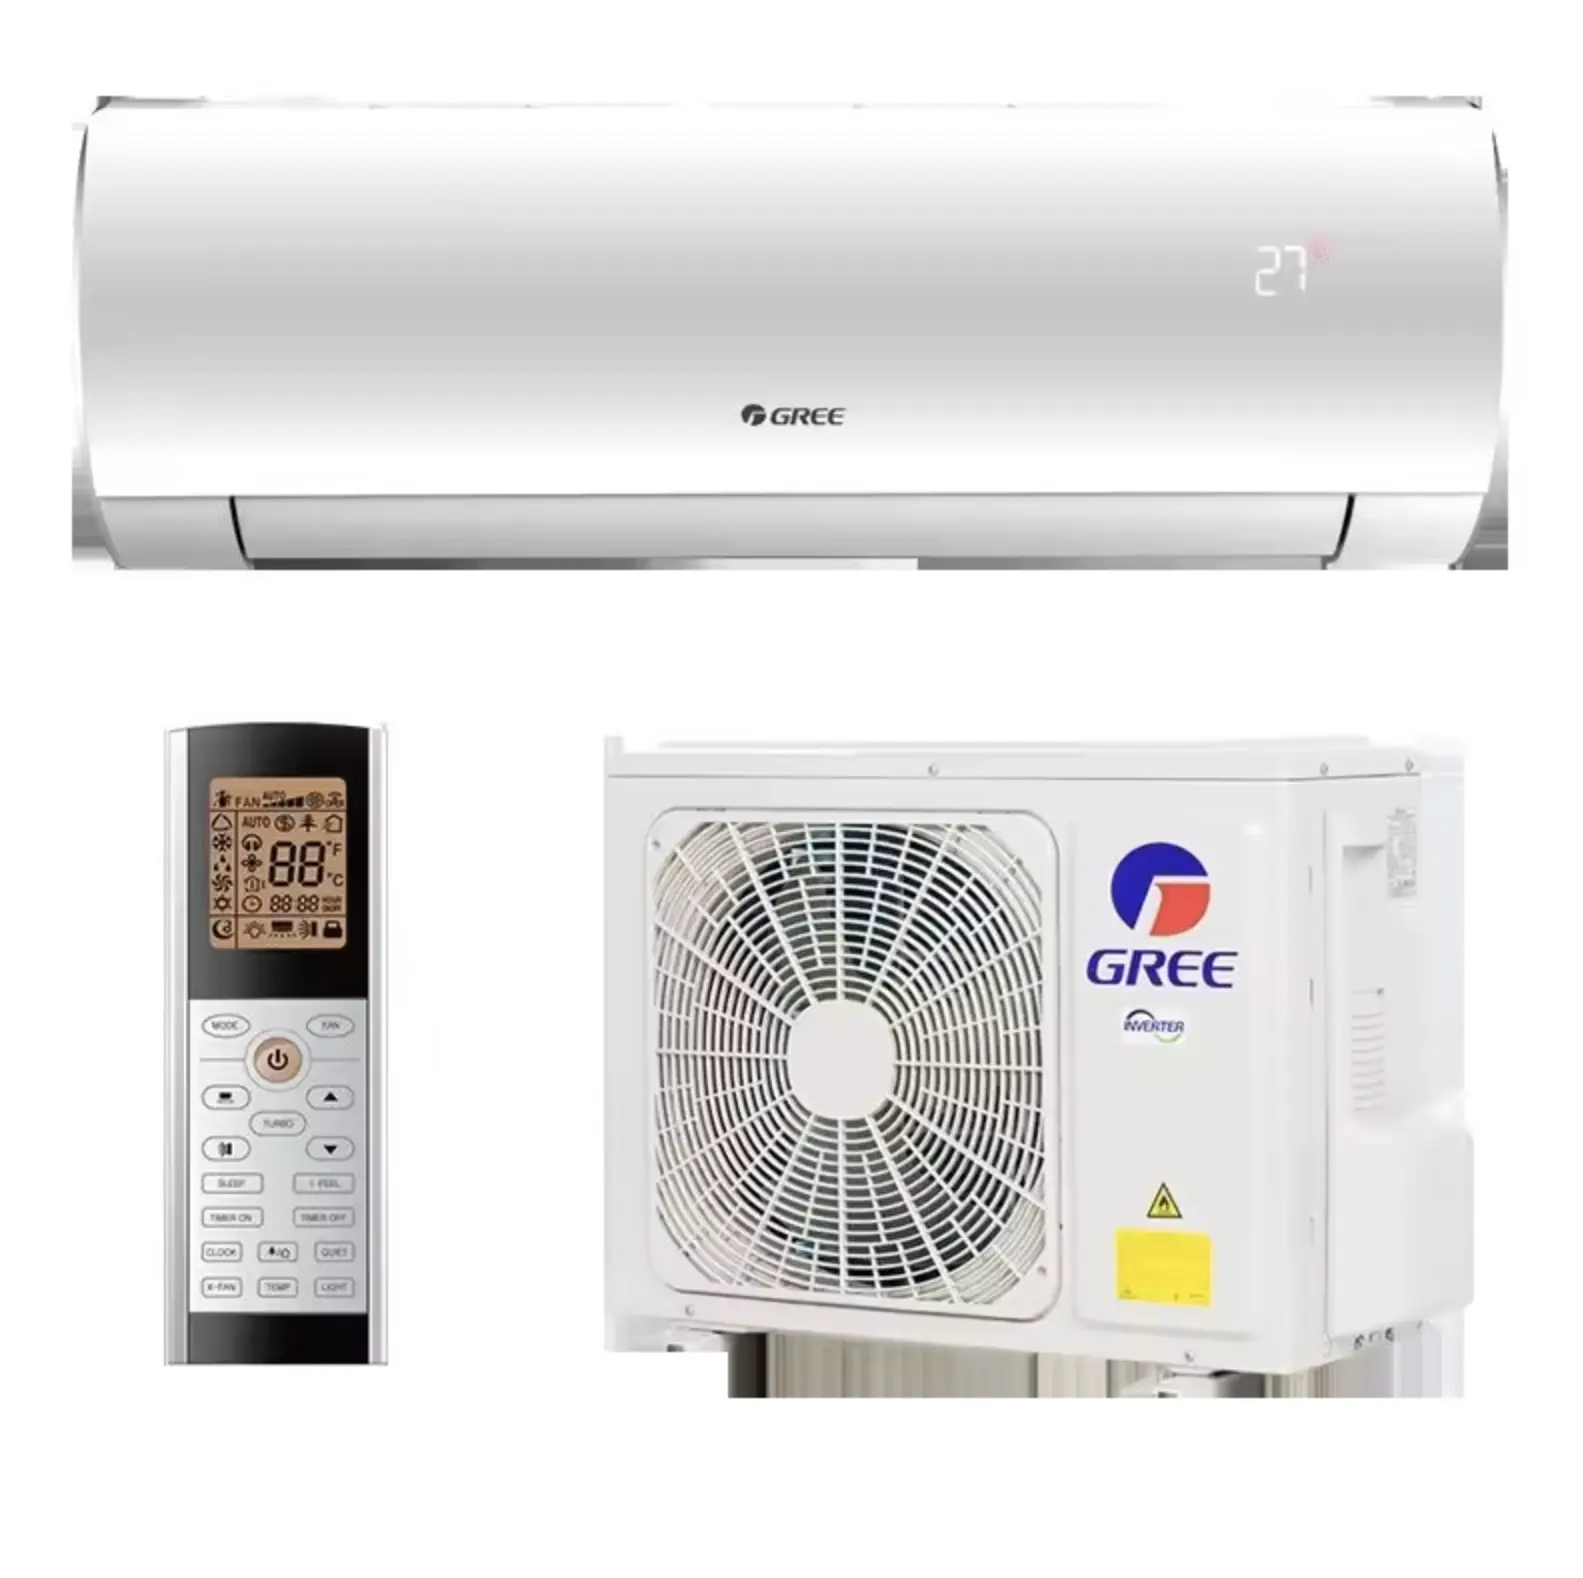 Wholesales Cheap Prices Gree 9000 12000 18000 24000Btu Wall Mounted Split AC Wifi Control Smart Gree lg Inverter Air Conditioner